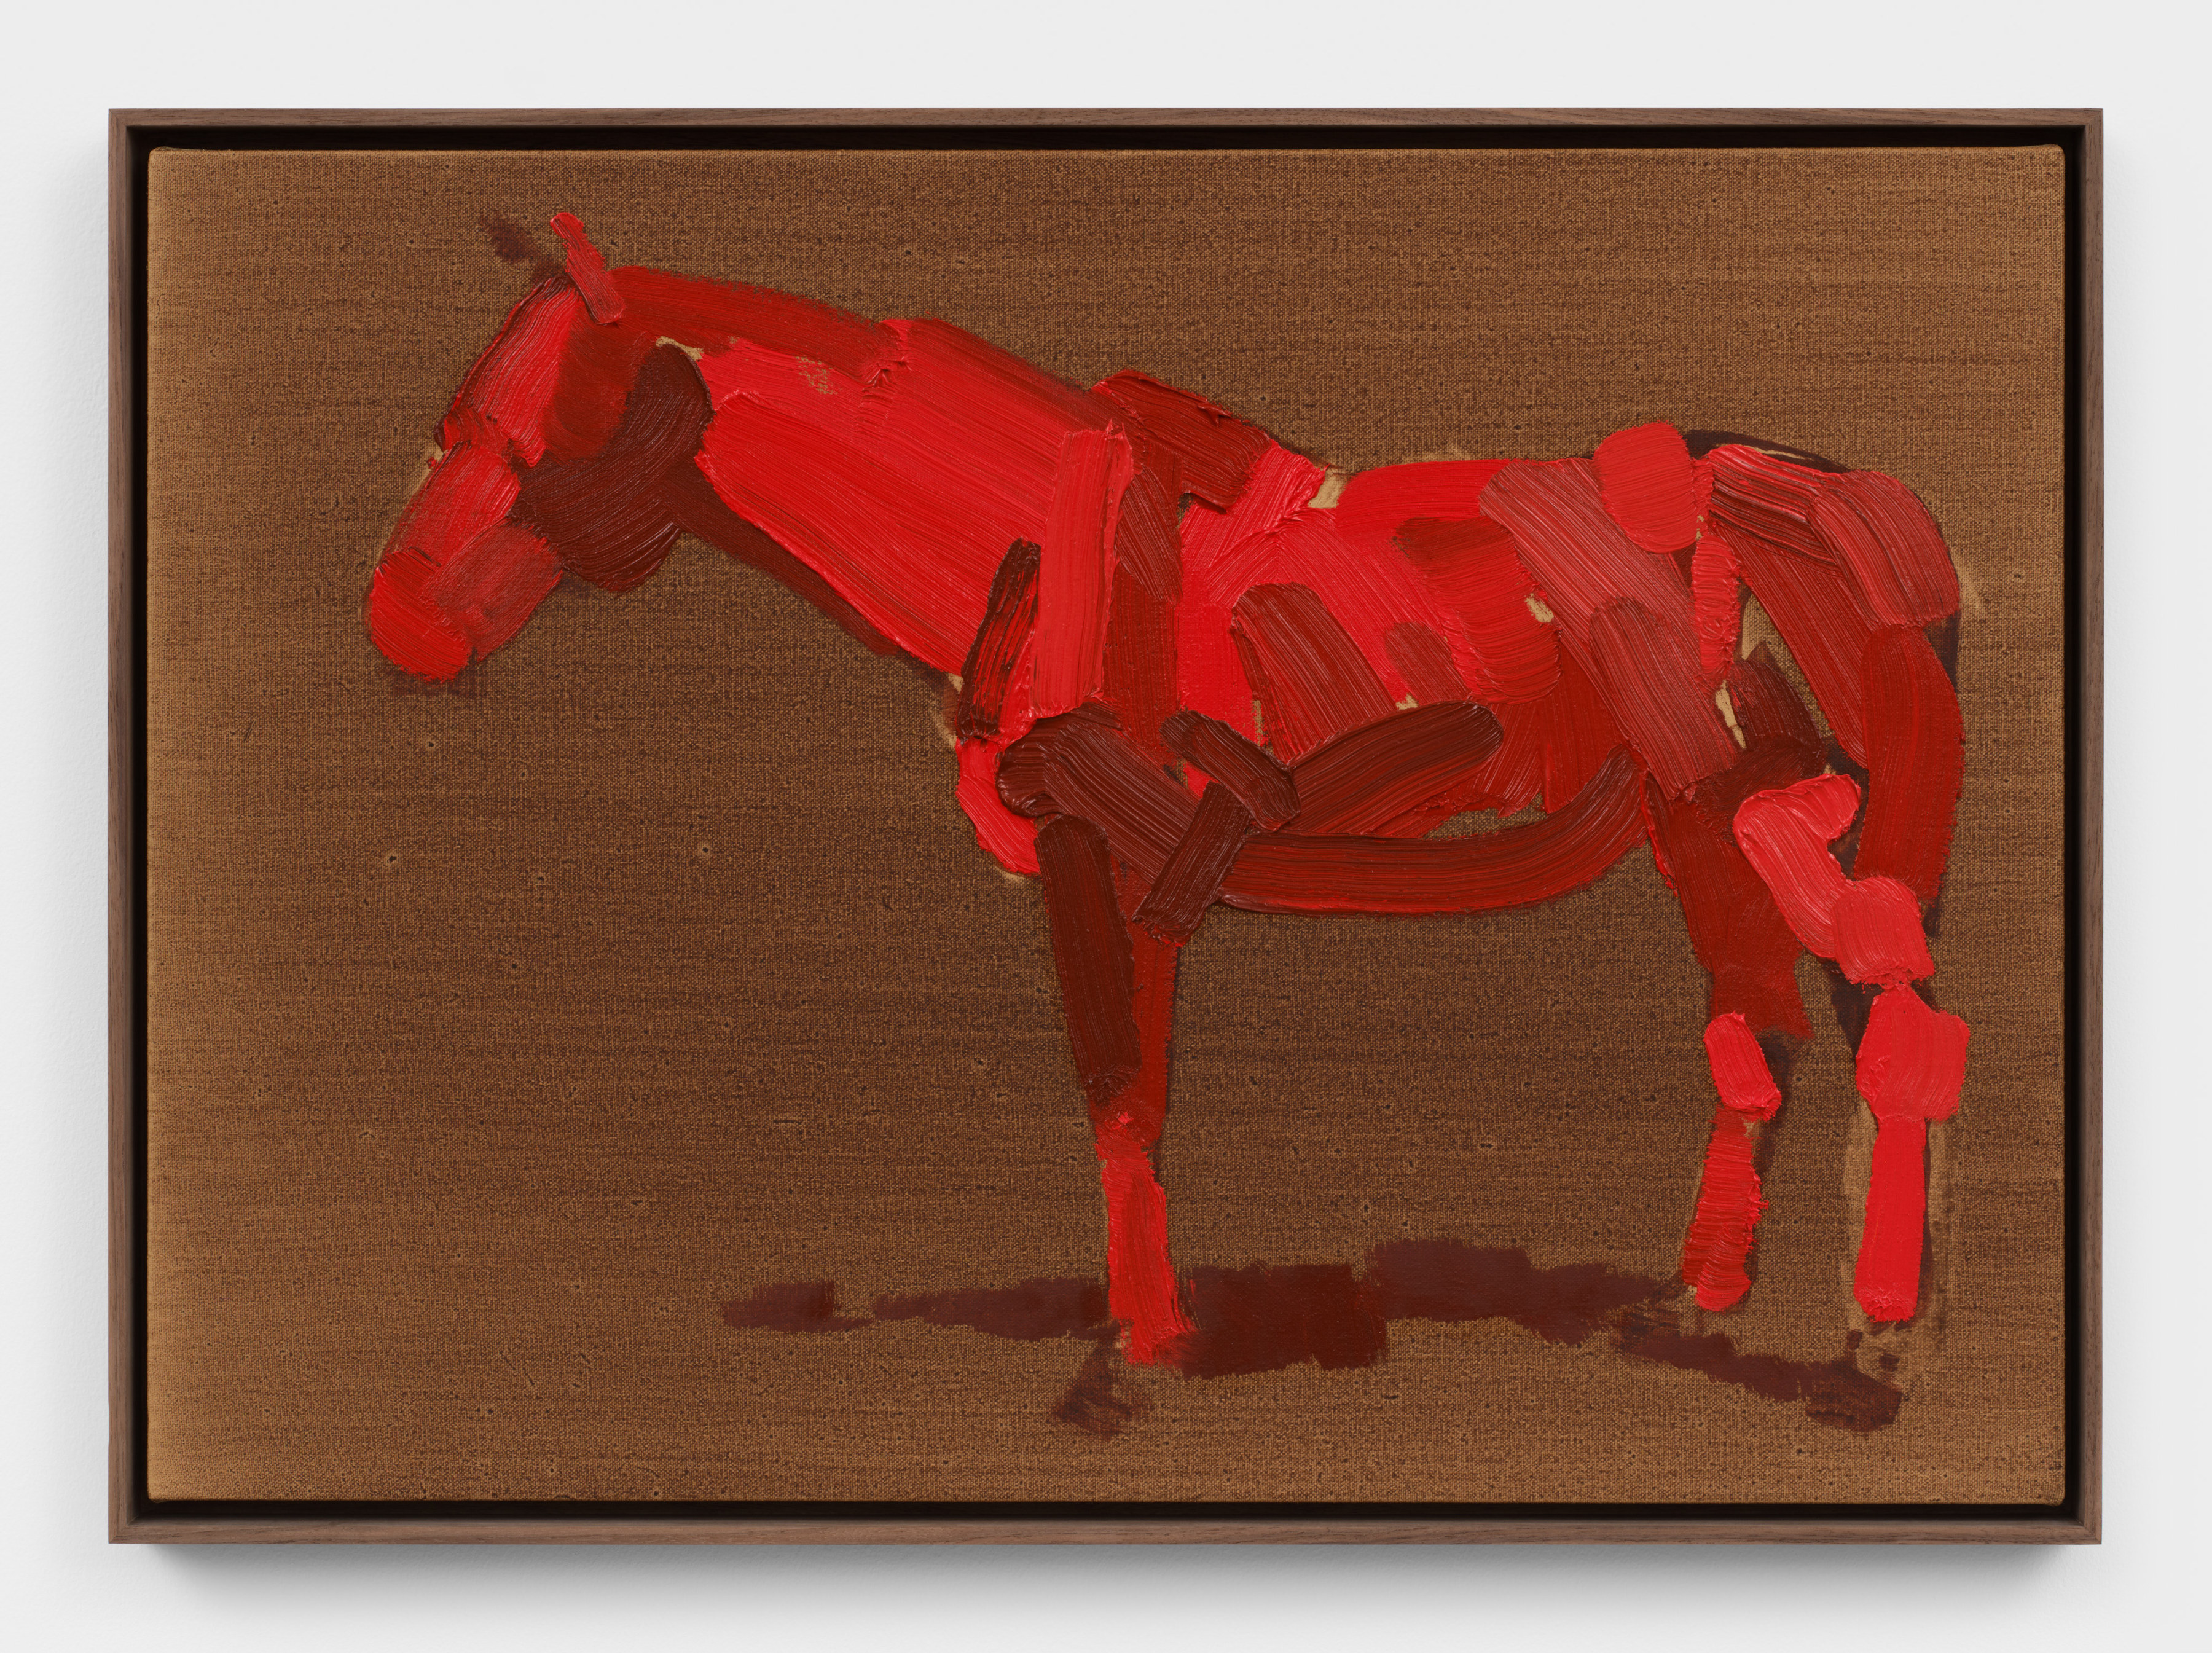 A painting with thick brushstrokes depicting the side view of a horse grazing rendered in shades of red against a brown background.